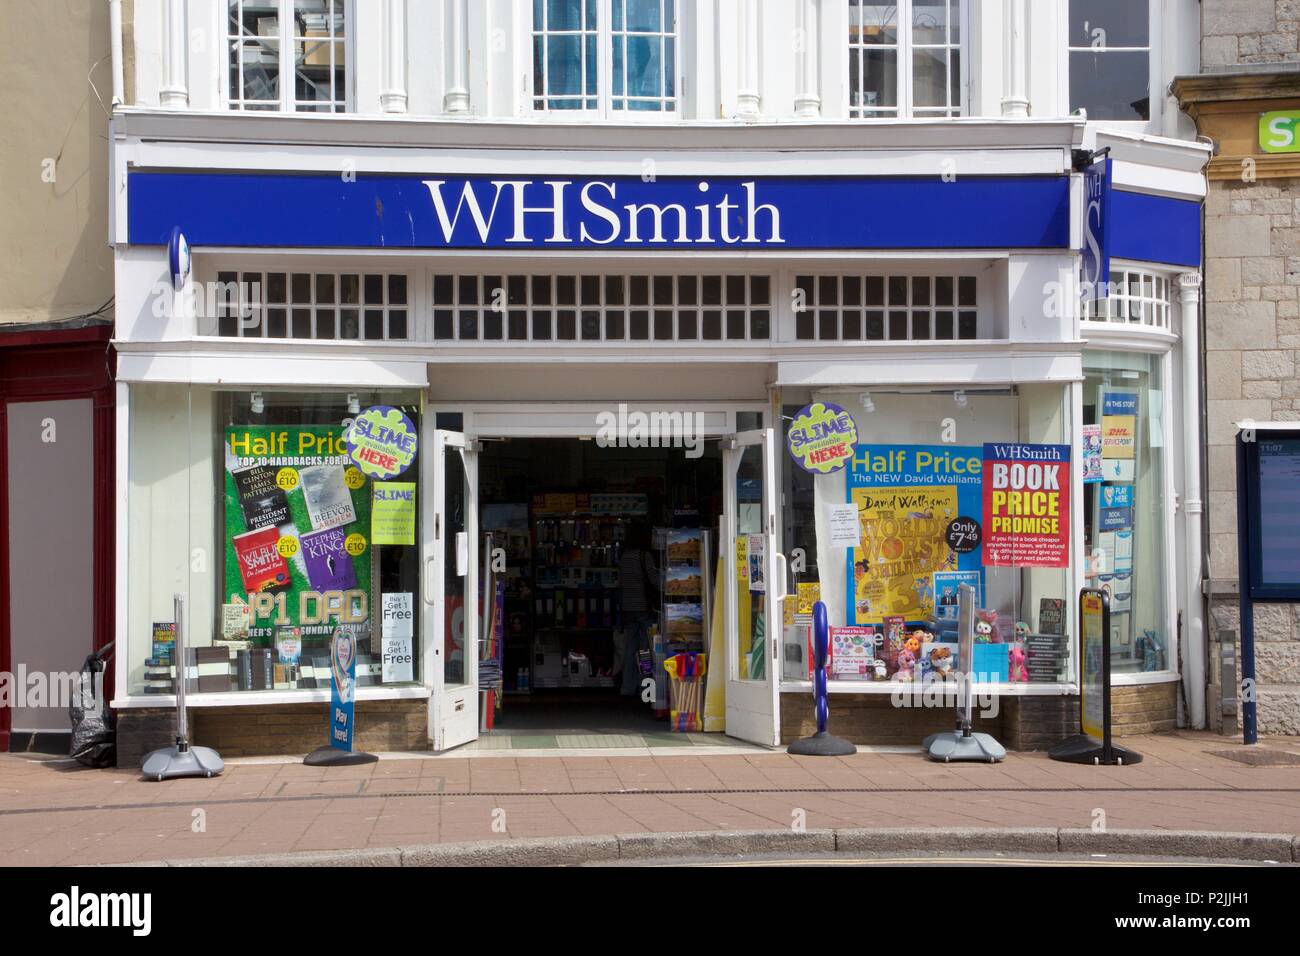 WHSmith shop, a British retailer selling books, stationery, magazines, newspapers and confectionary, in Teignmouth, South Devon Stock Photo